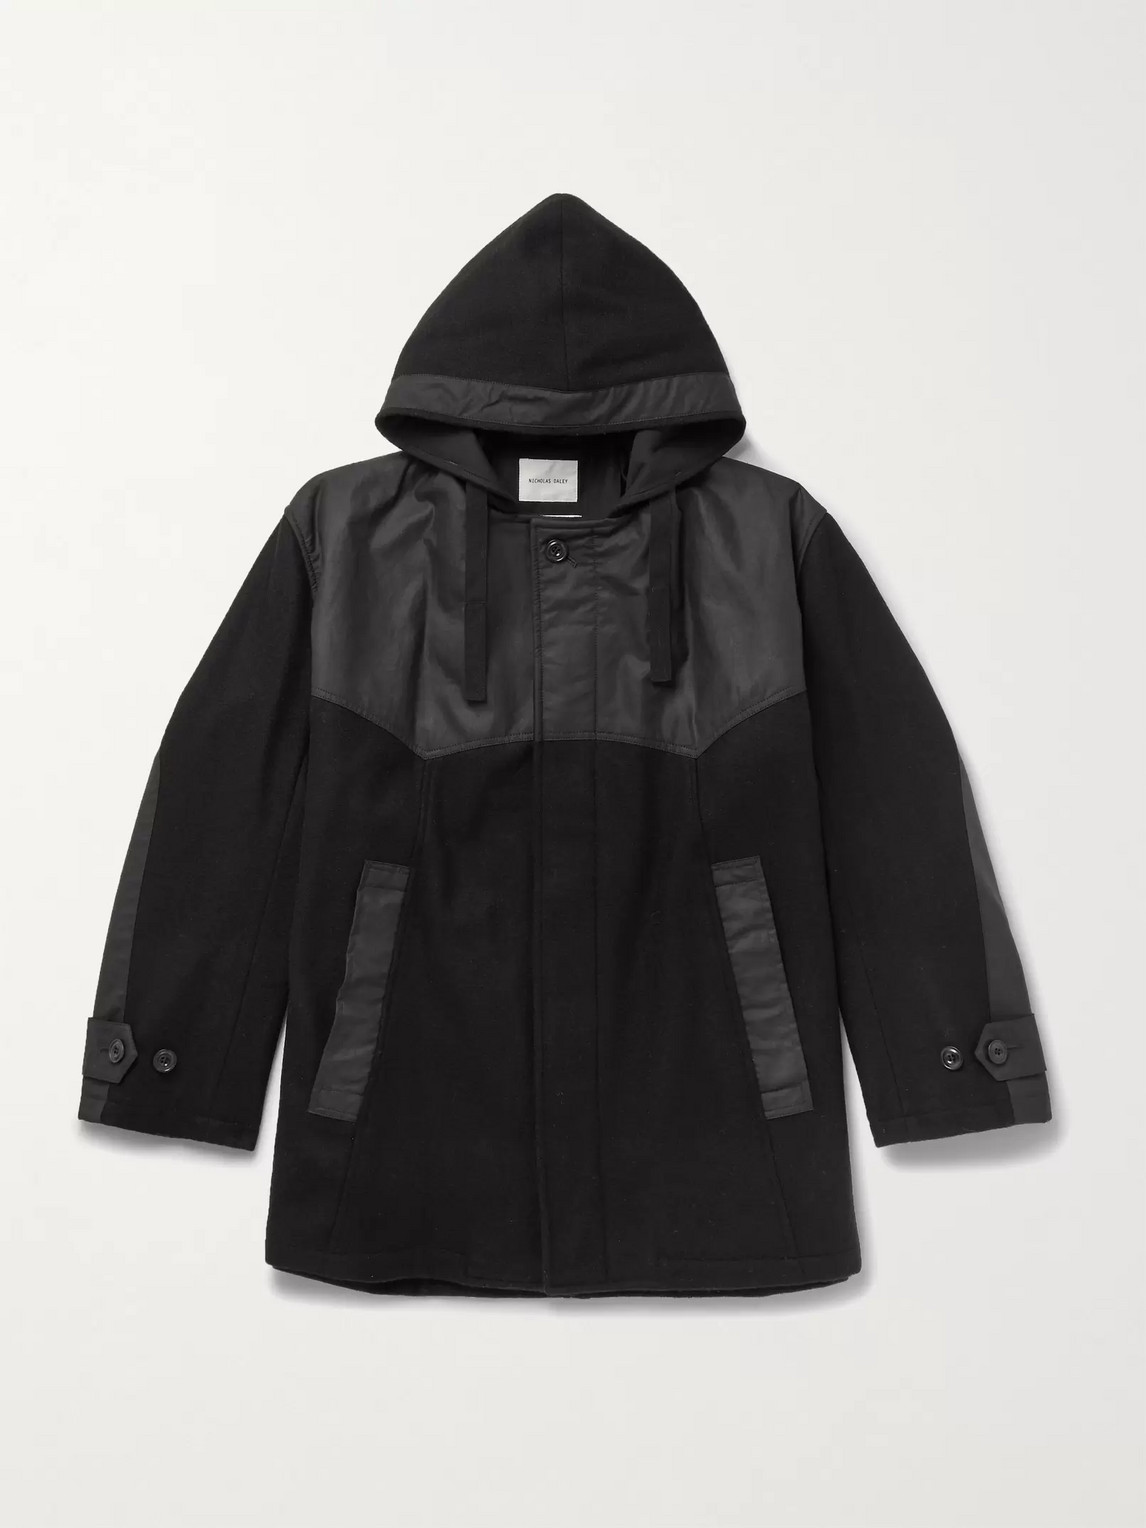 NICHOLAS DALEY PANELLED WAXED-COTTON AND MELTON WOOL HOODED COAT